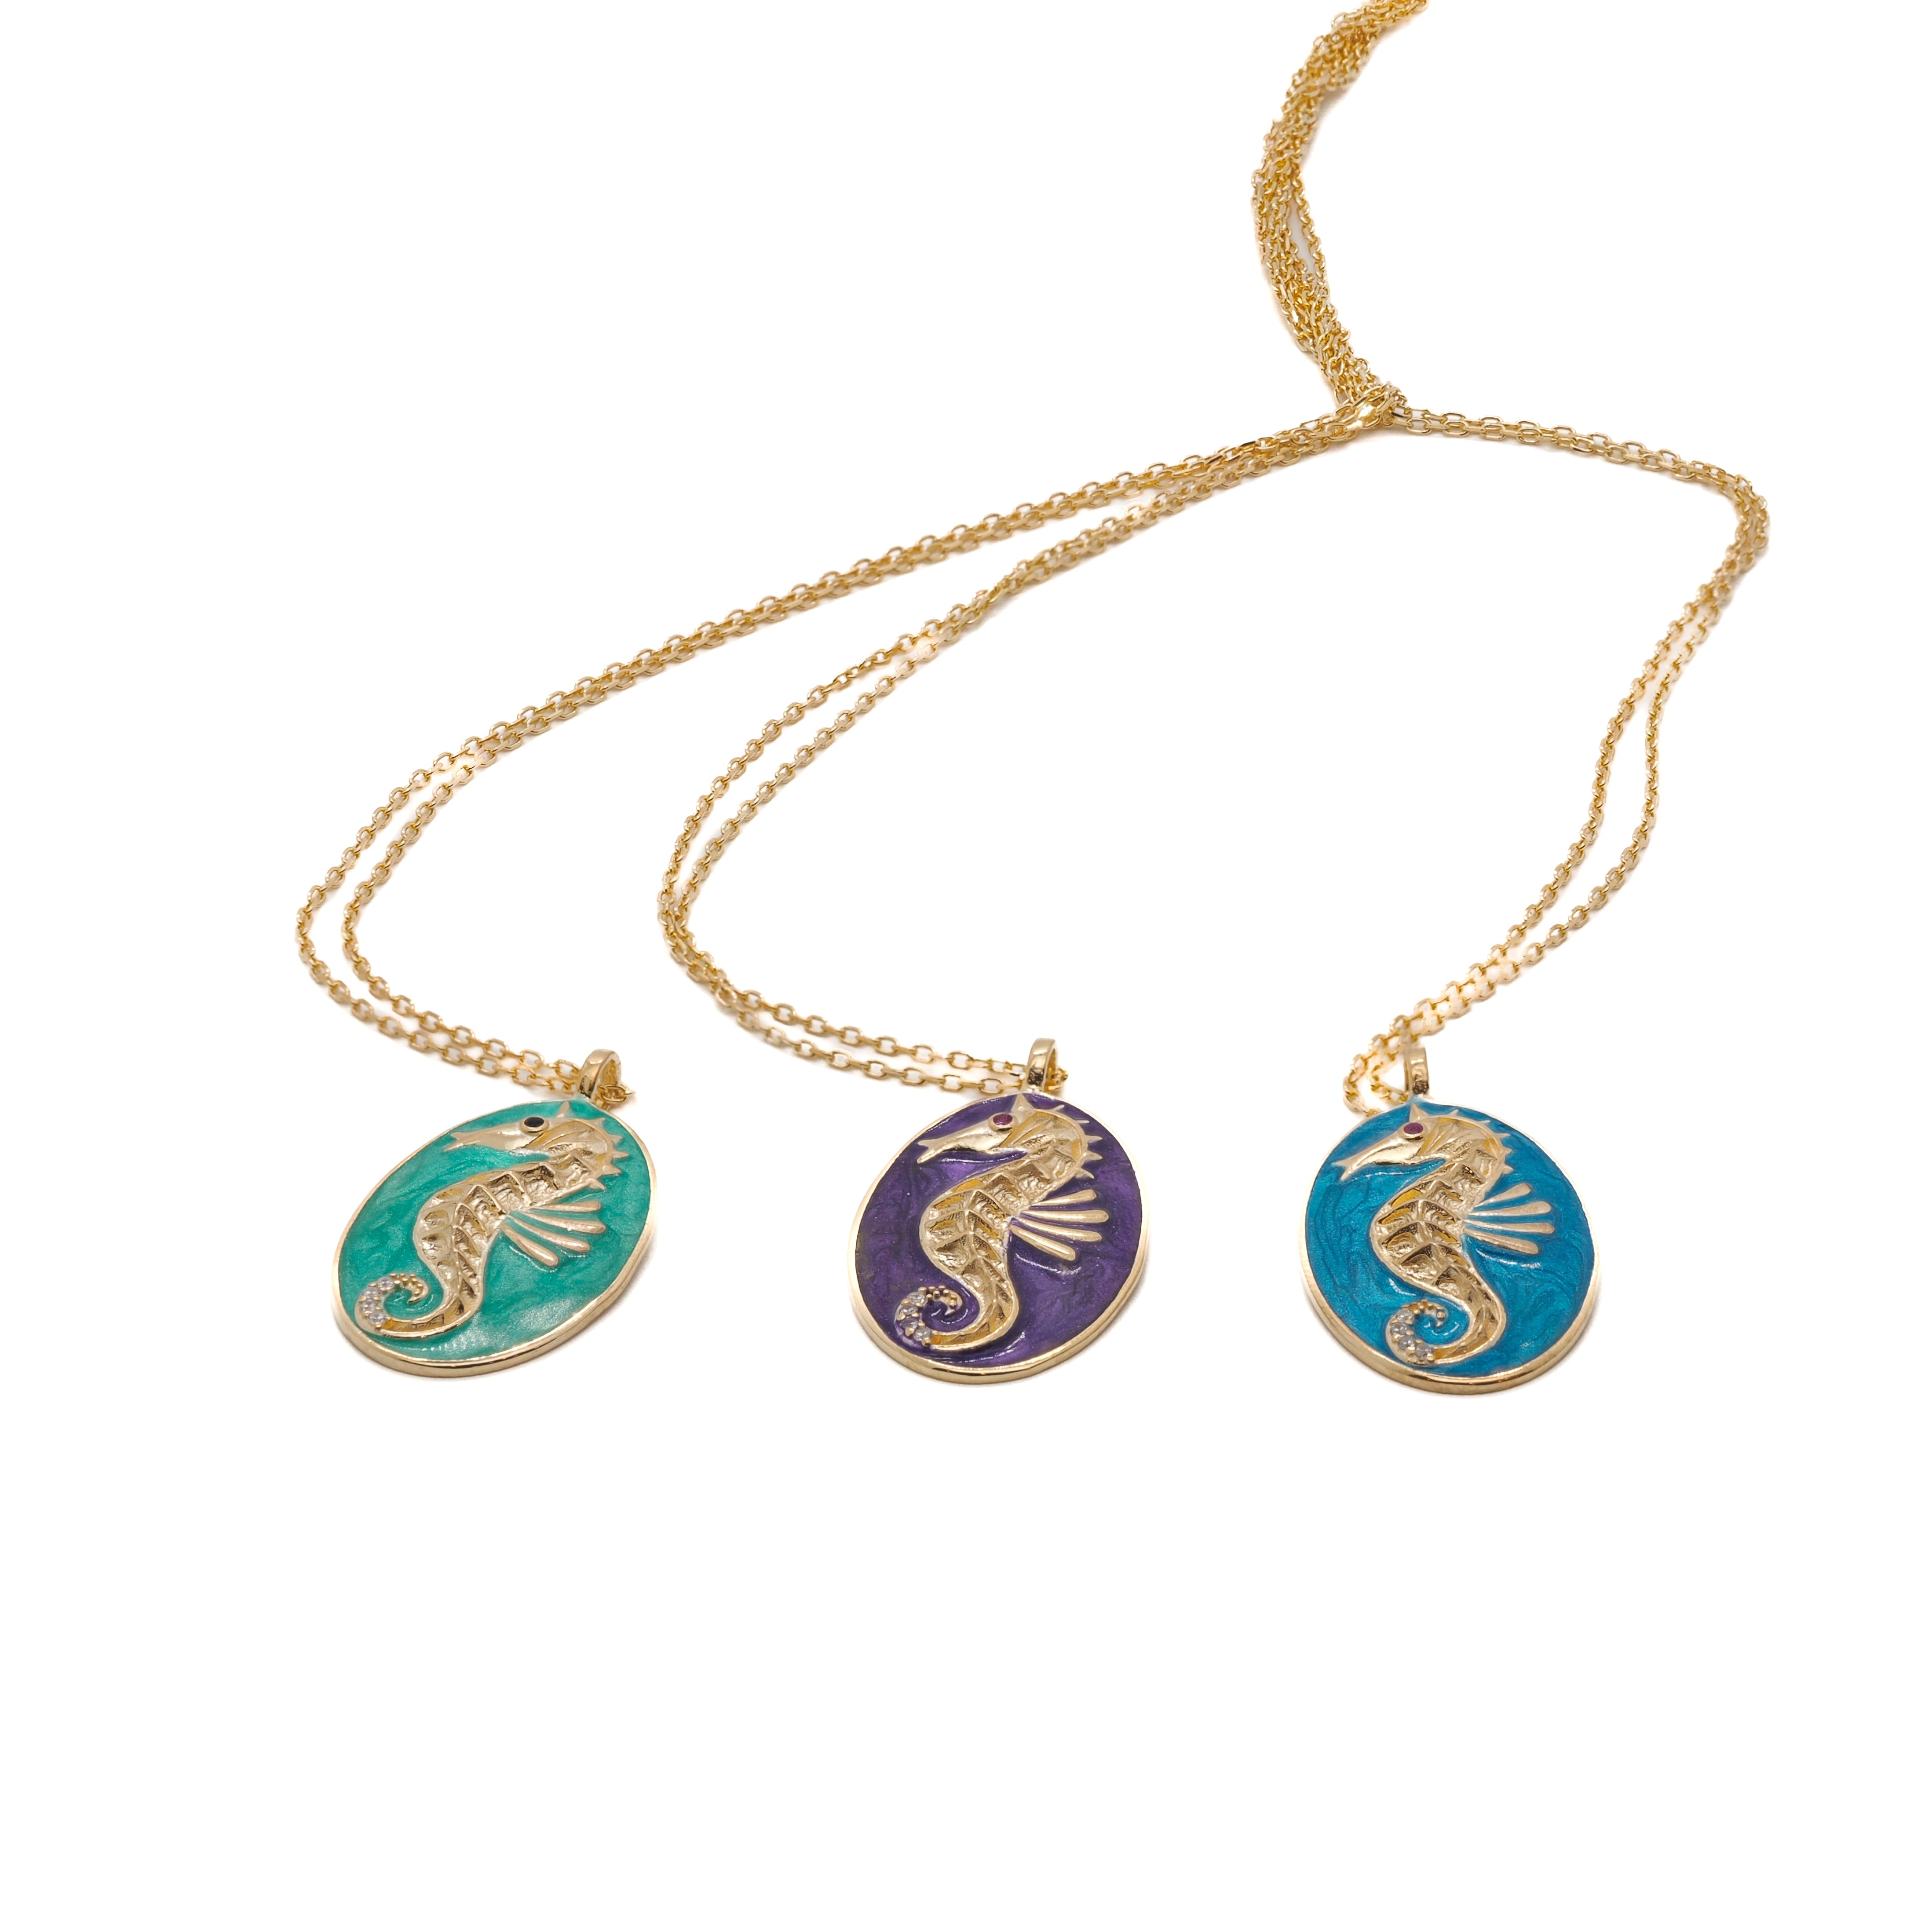 The elegant Spirit Animal Seahorse Necklace, crafted with 925 Sterling silver and 18K gold plating for a luxurious look.